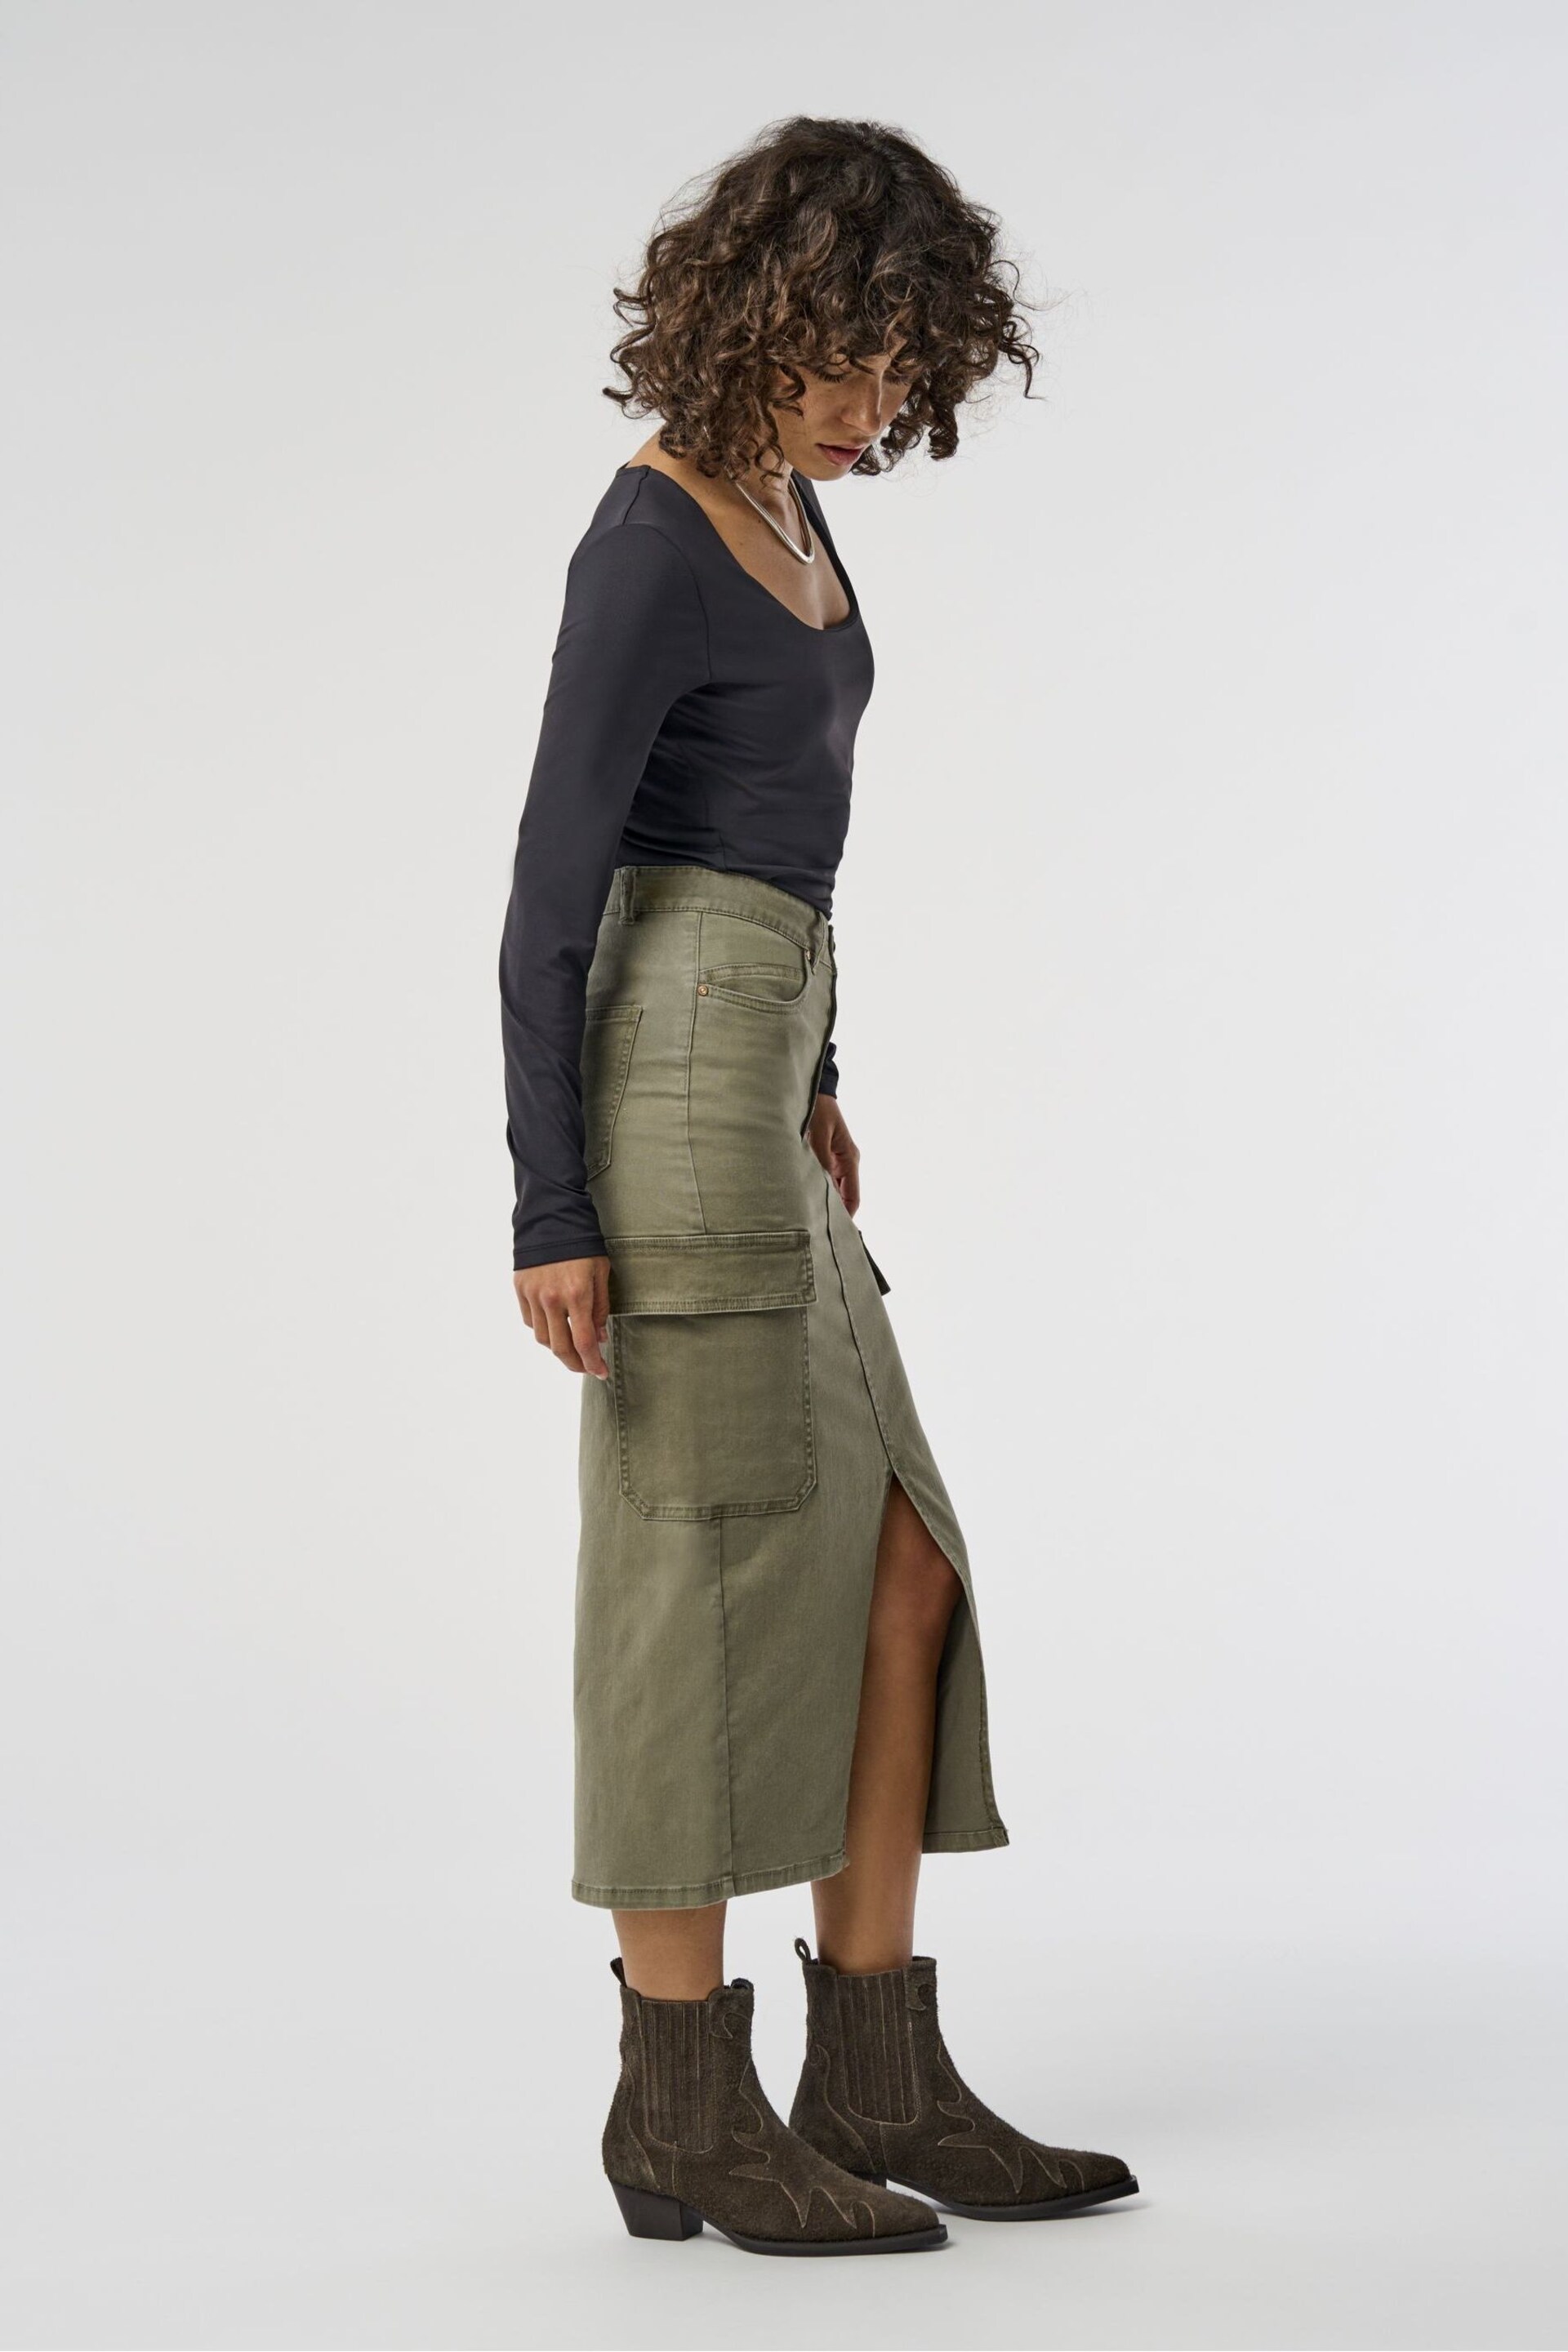 ONLY Green Utility Midi Skirt With Front Split - Image 1 of 8